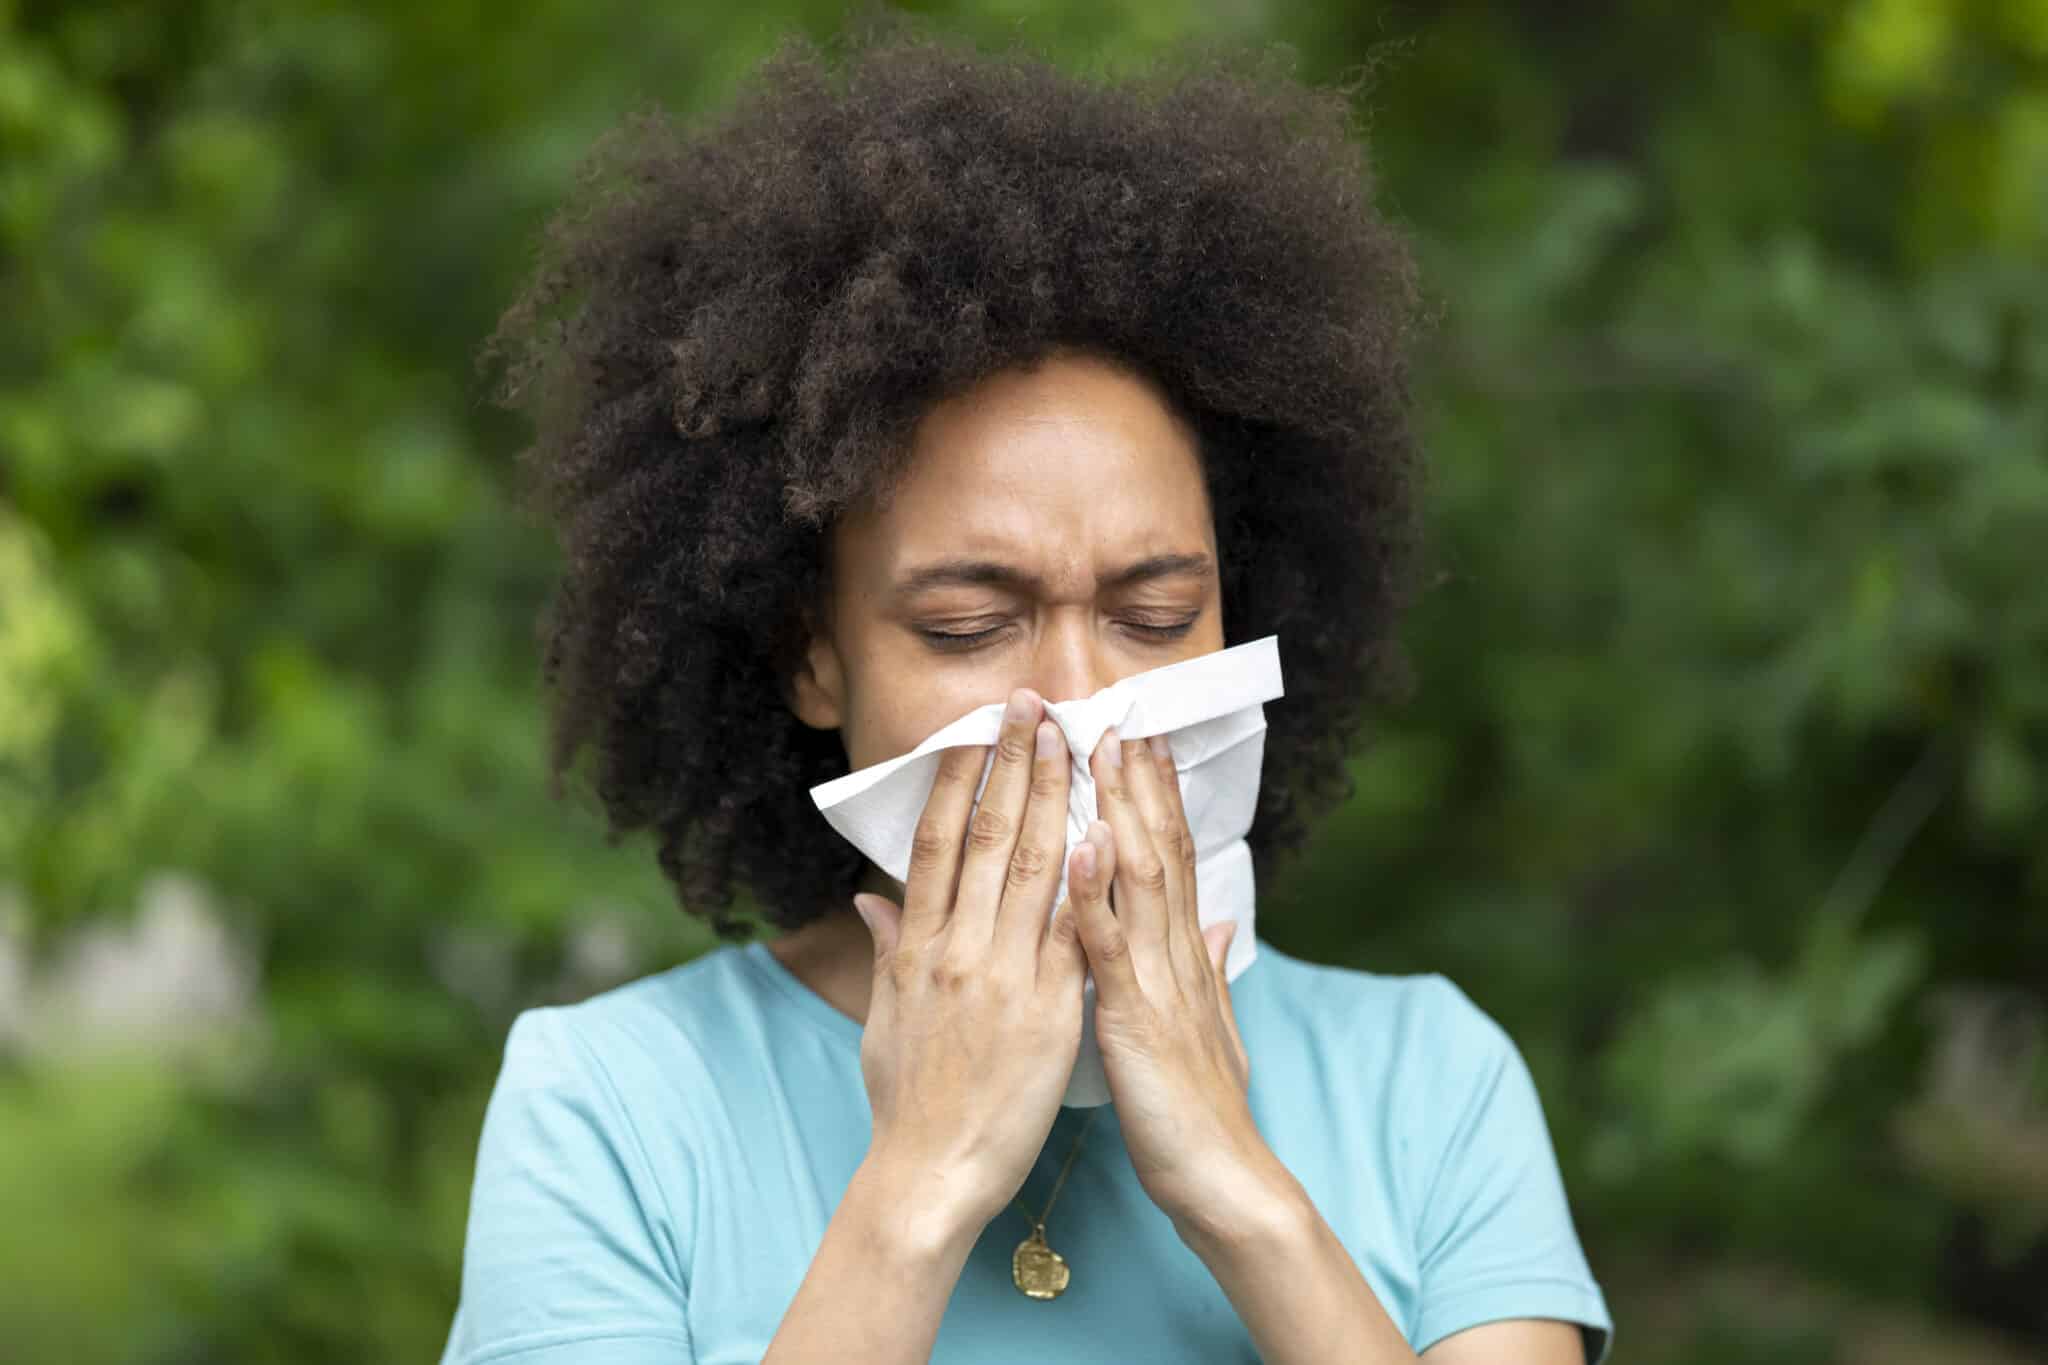 Woman with Sinusitis Problems is Feeling Displeased and Blowing Nose in Napkin During a Walk in City Park During a Summer Day.